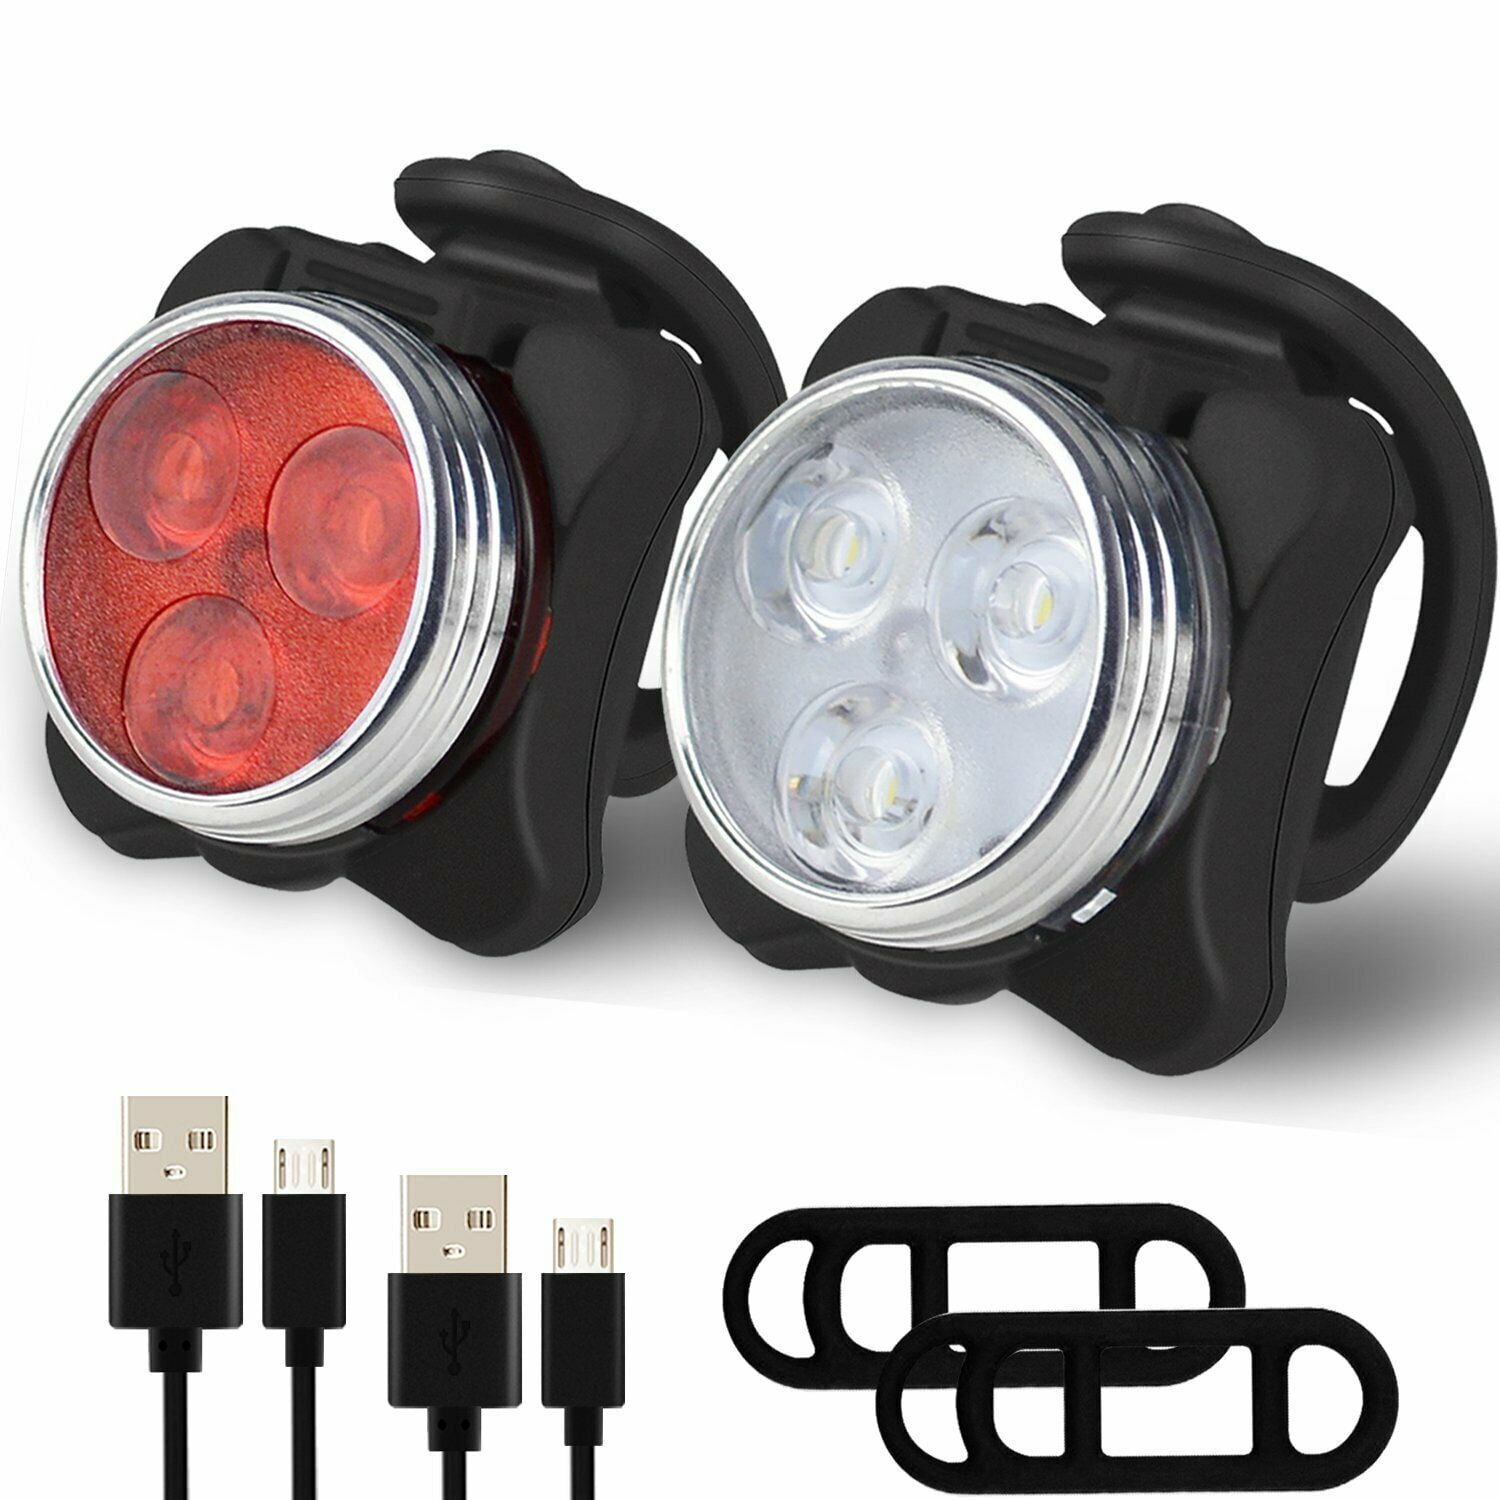 Super Bright USB Rechargeable Bicycle Lights,Waterproof Mountain Bike Light Set.